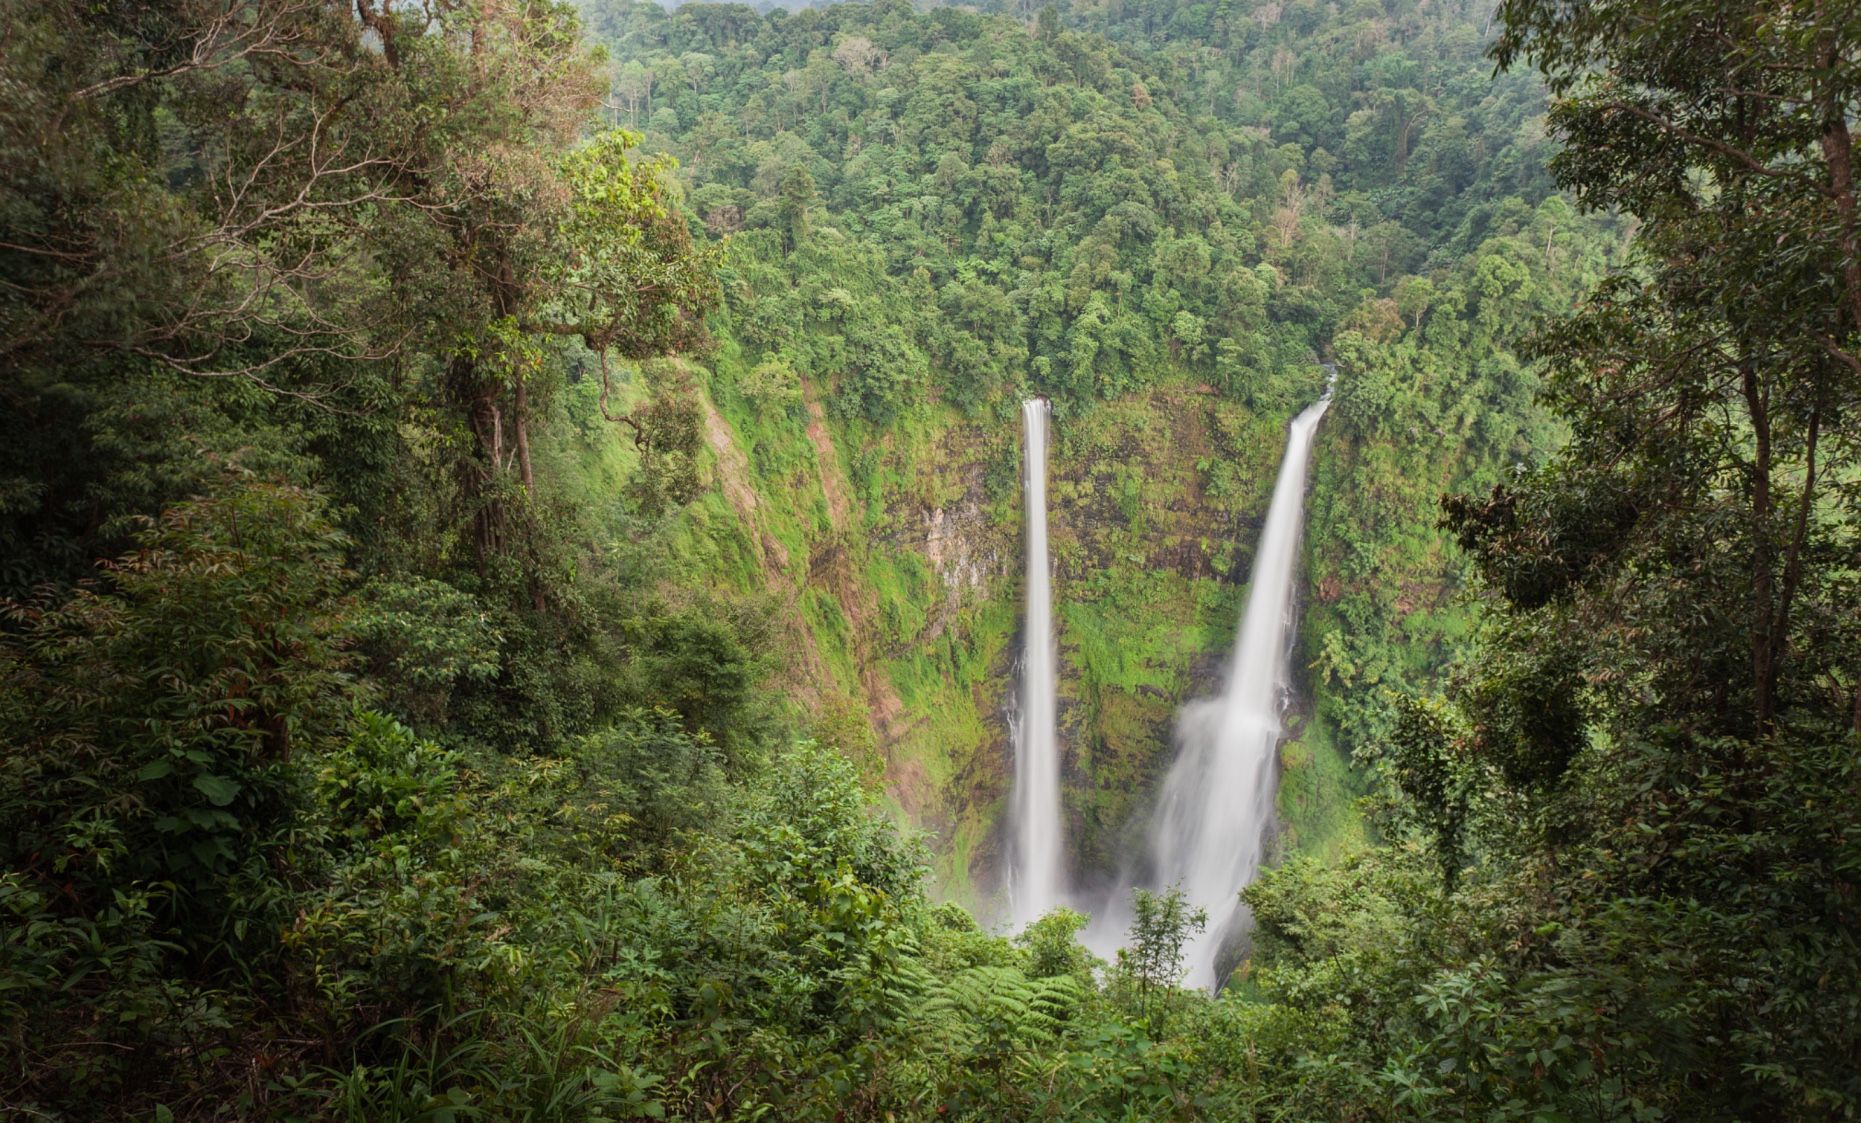 The impressive twin 120m tad fane waterfalls are located in the Dong Hua Sao National Park on the Bolaven Plateau